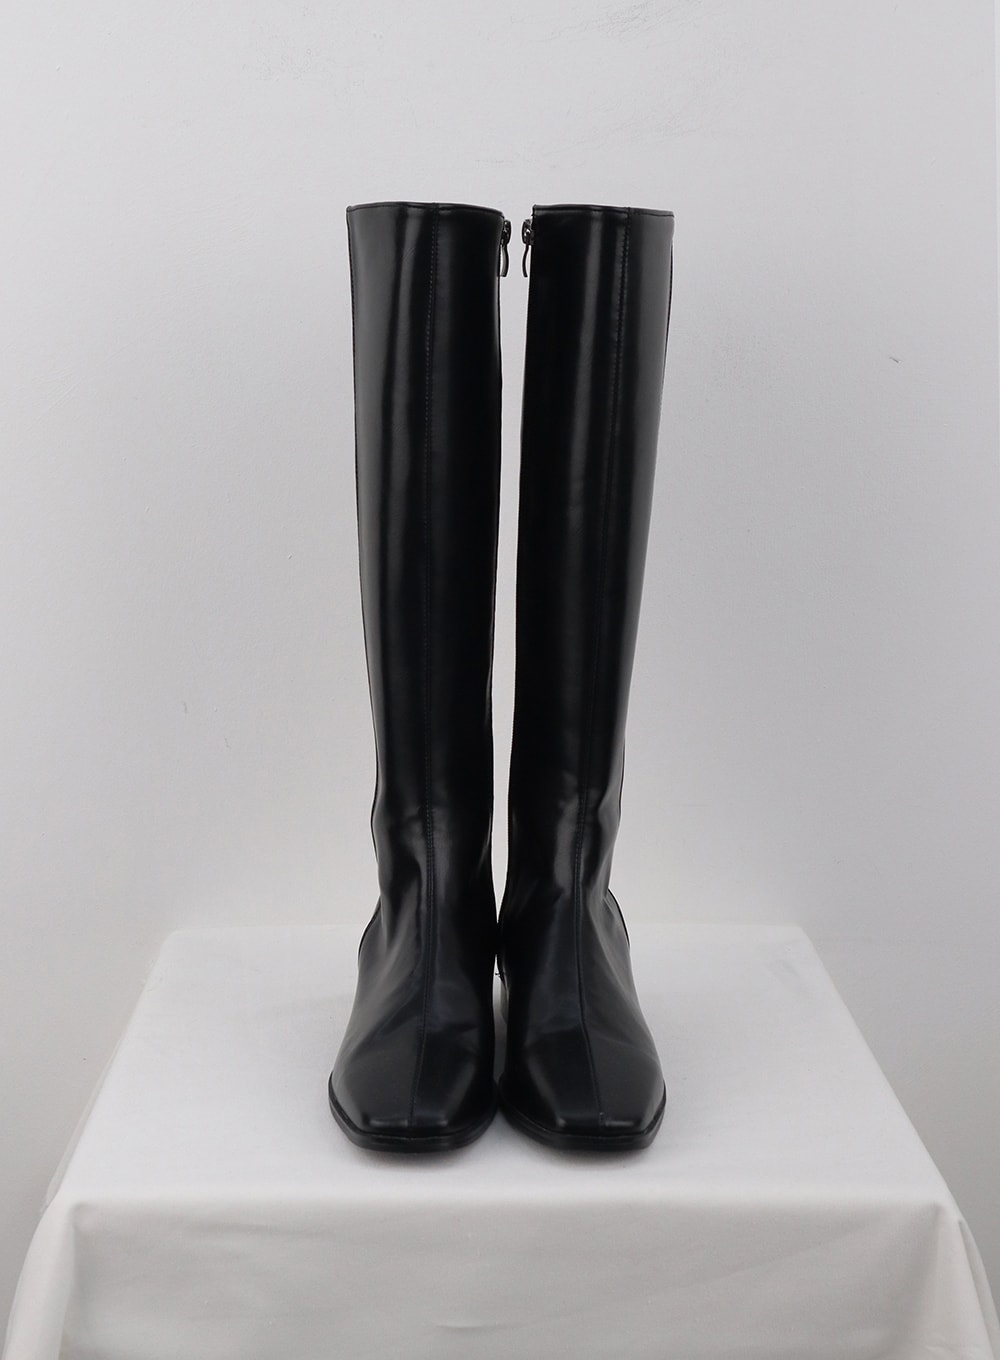 Faux Patent Leather Mid-Calf Boots Black Women's 8.5